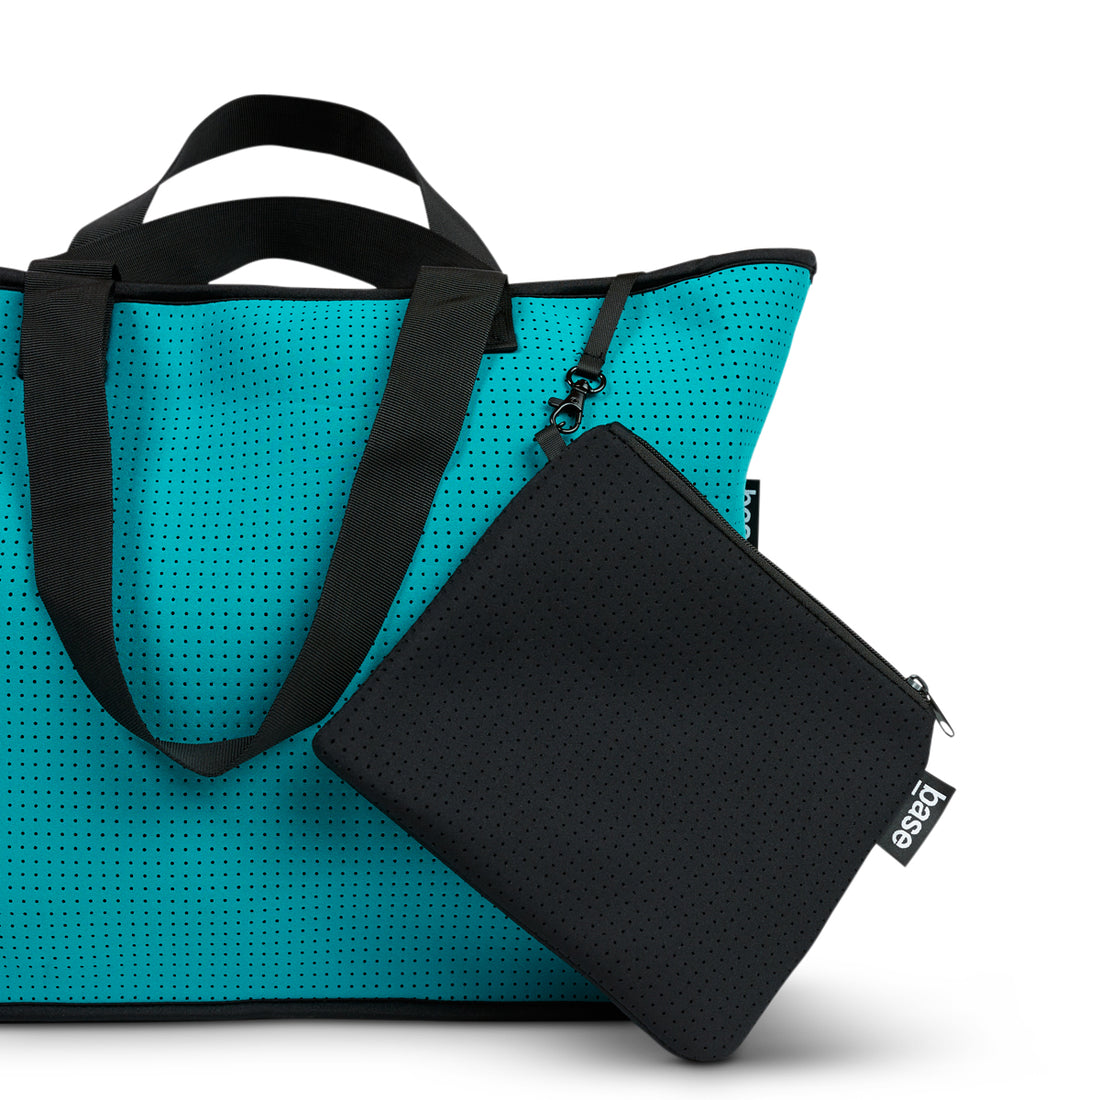 Neoprene bag in teal with double straps and attachements